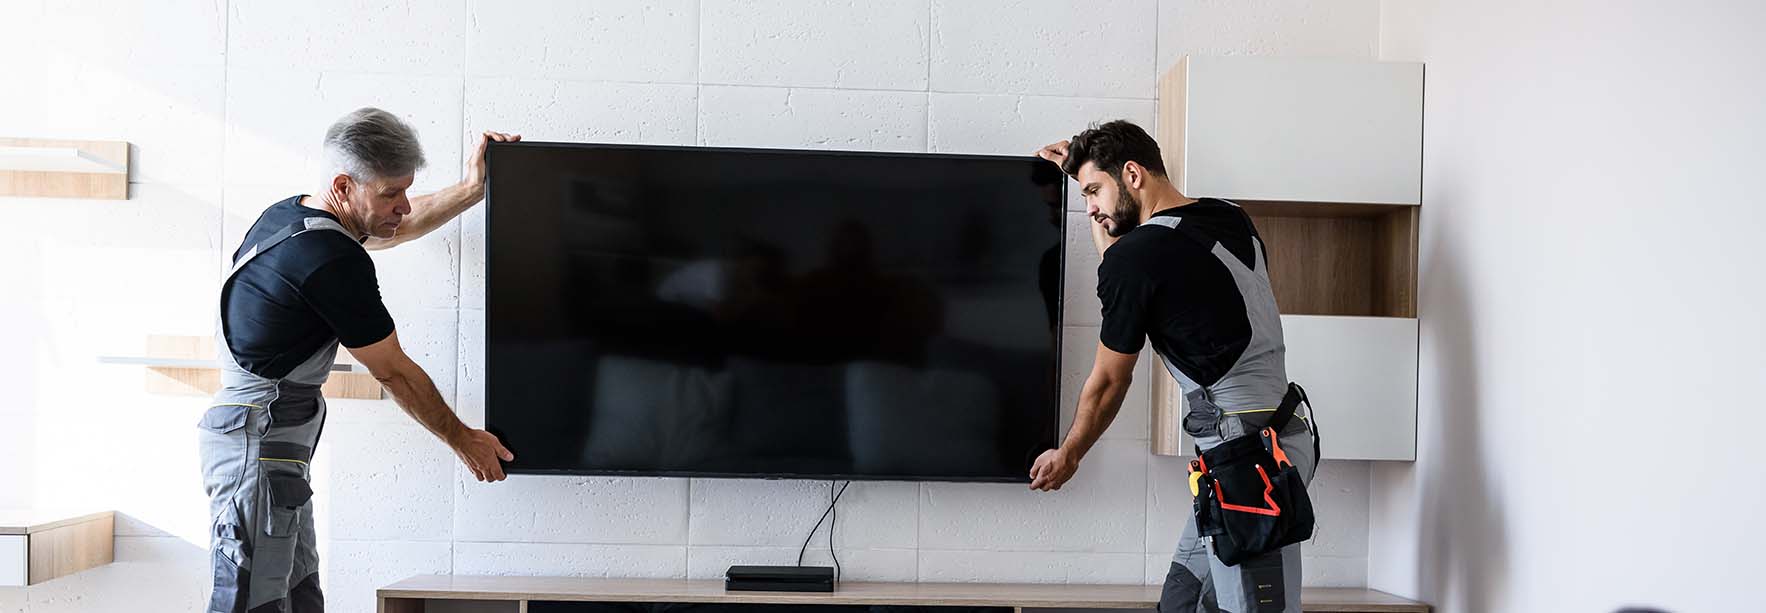 A TV mounted on a wall with cables neatly hidden, installed by two workers.